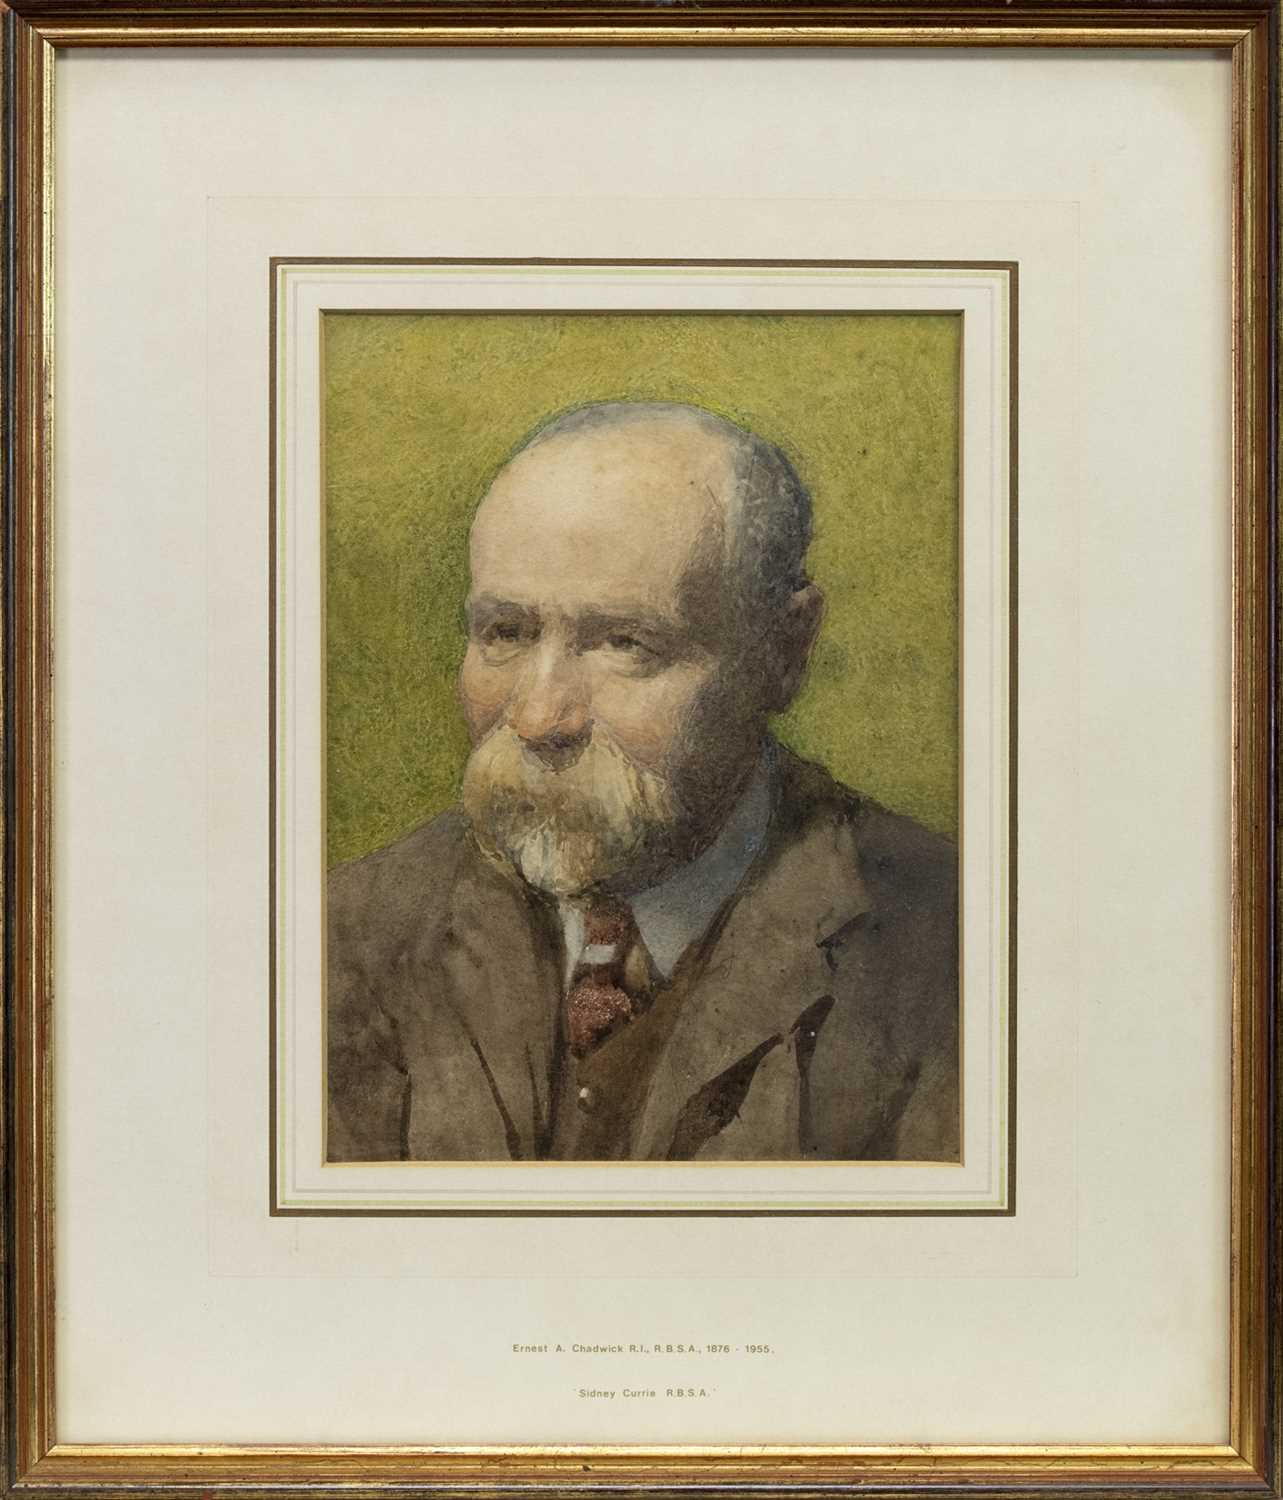 Lot 13 - SIDNEY CURRIE RBSA, A WATERCOLOUR BY ERNEST ALBERT CHADWICK